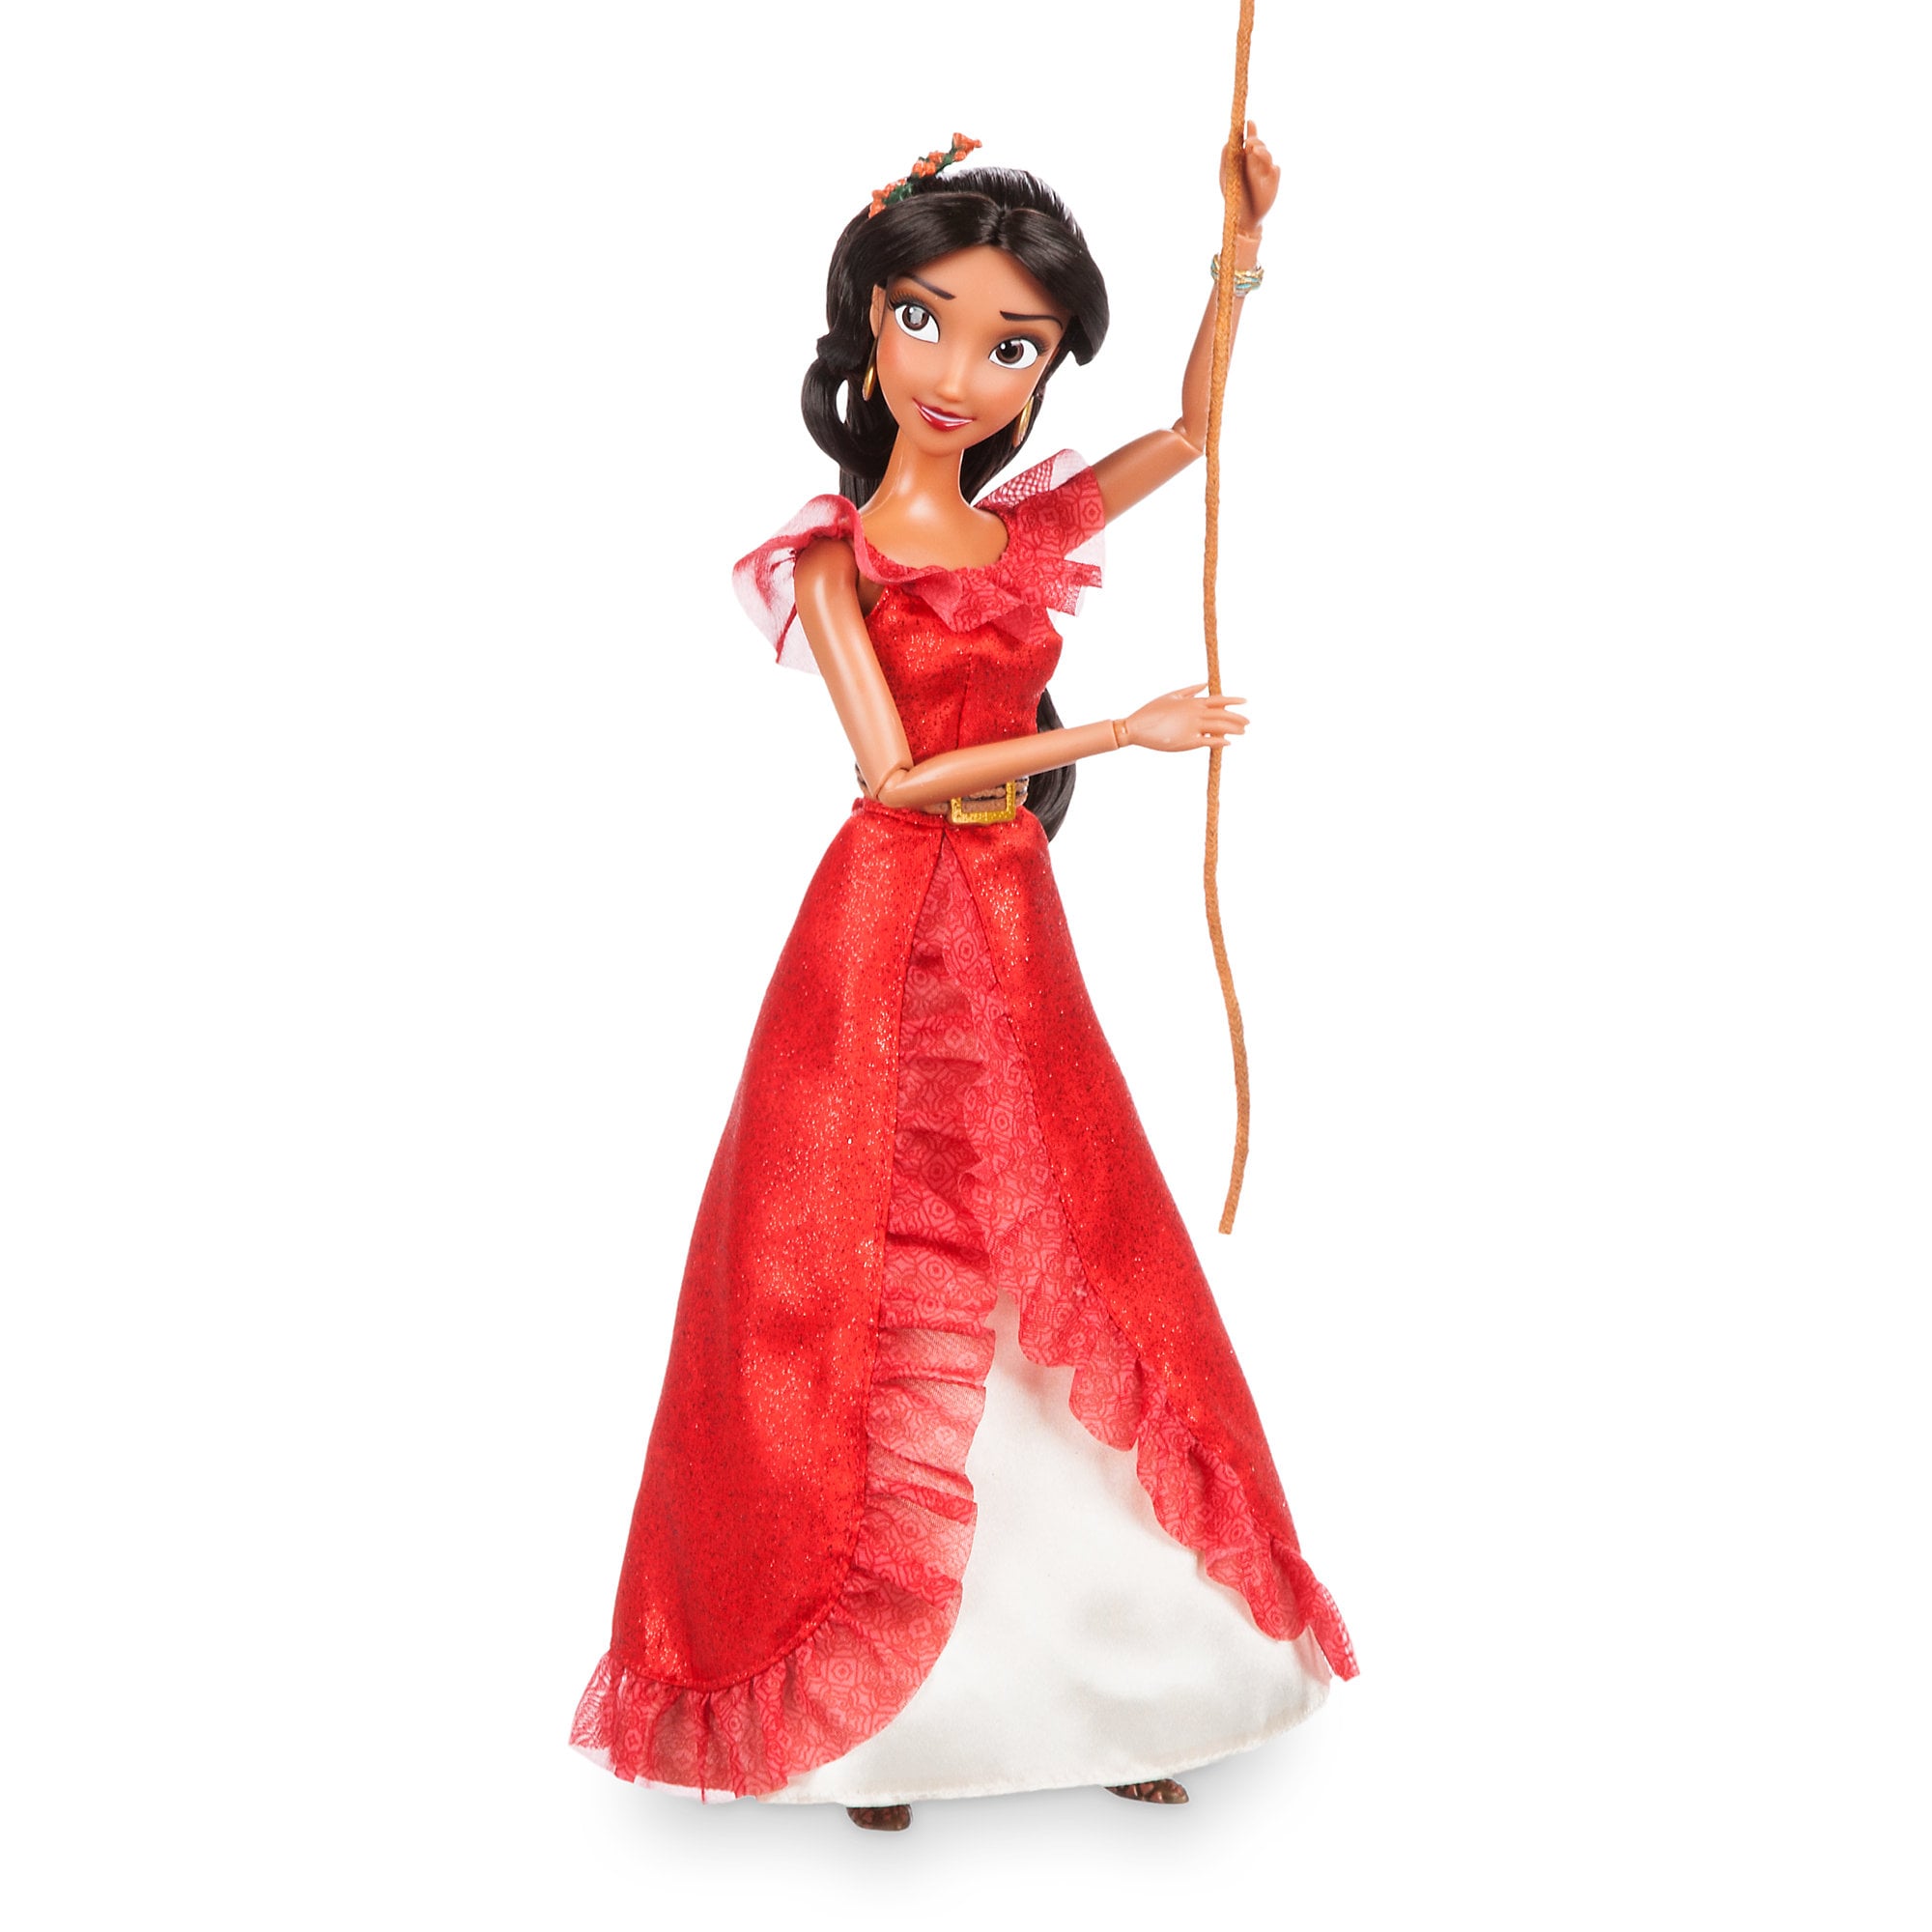 Disney Princess Collection Elena of Avalor 12 Inch Doll Figure for sale online